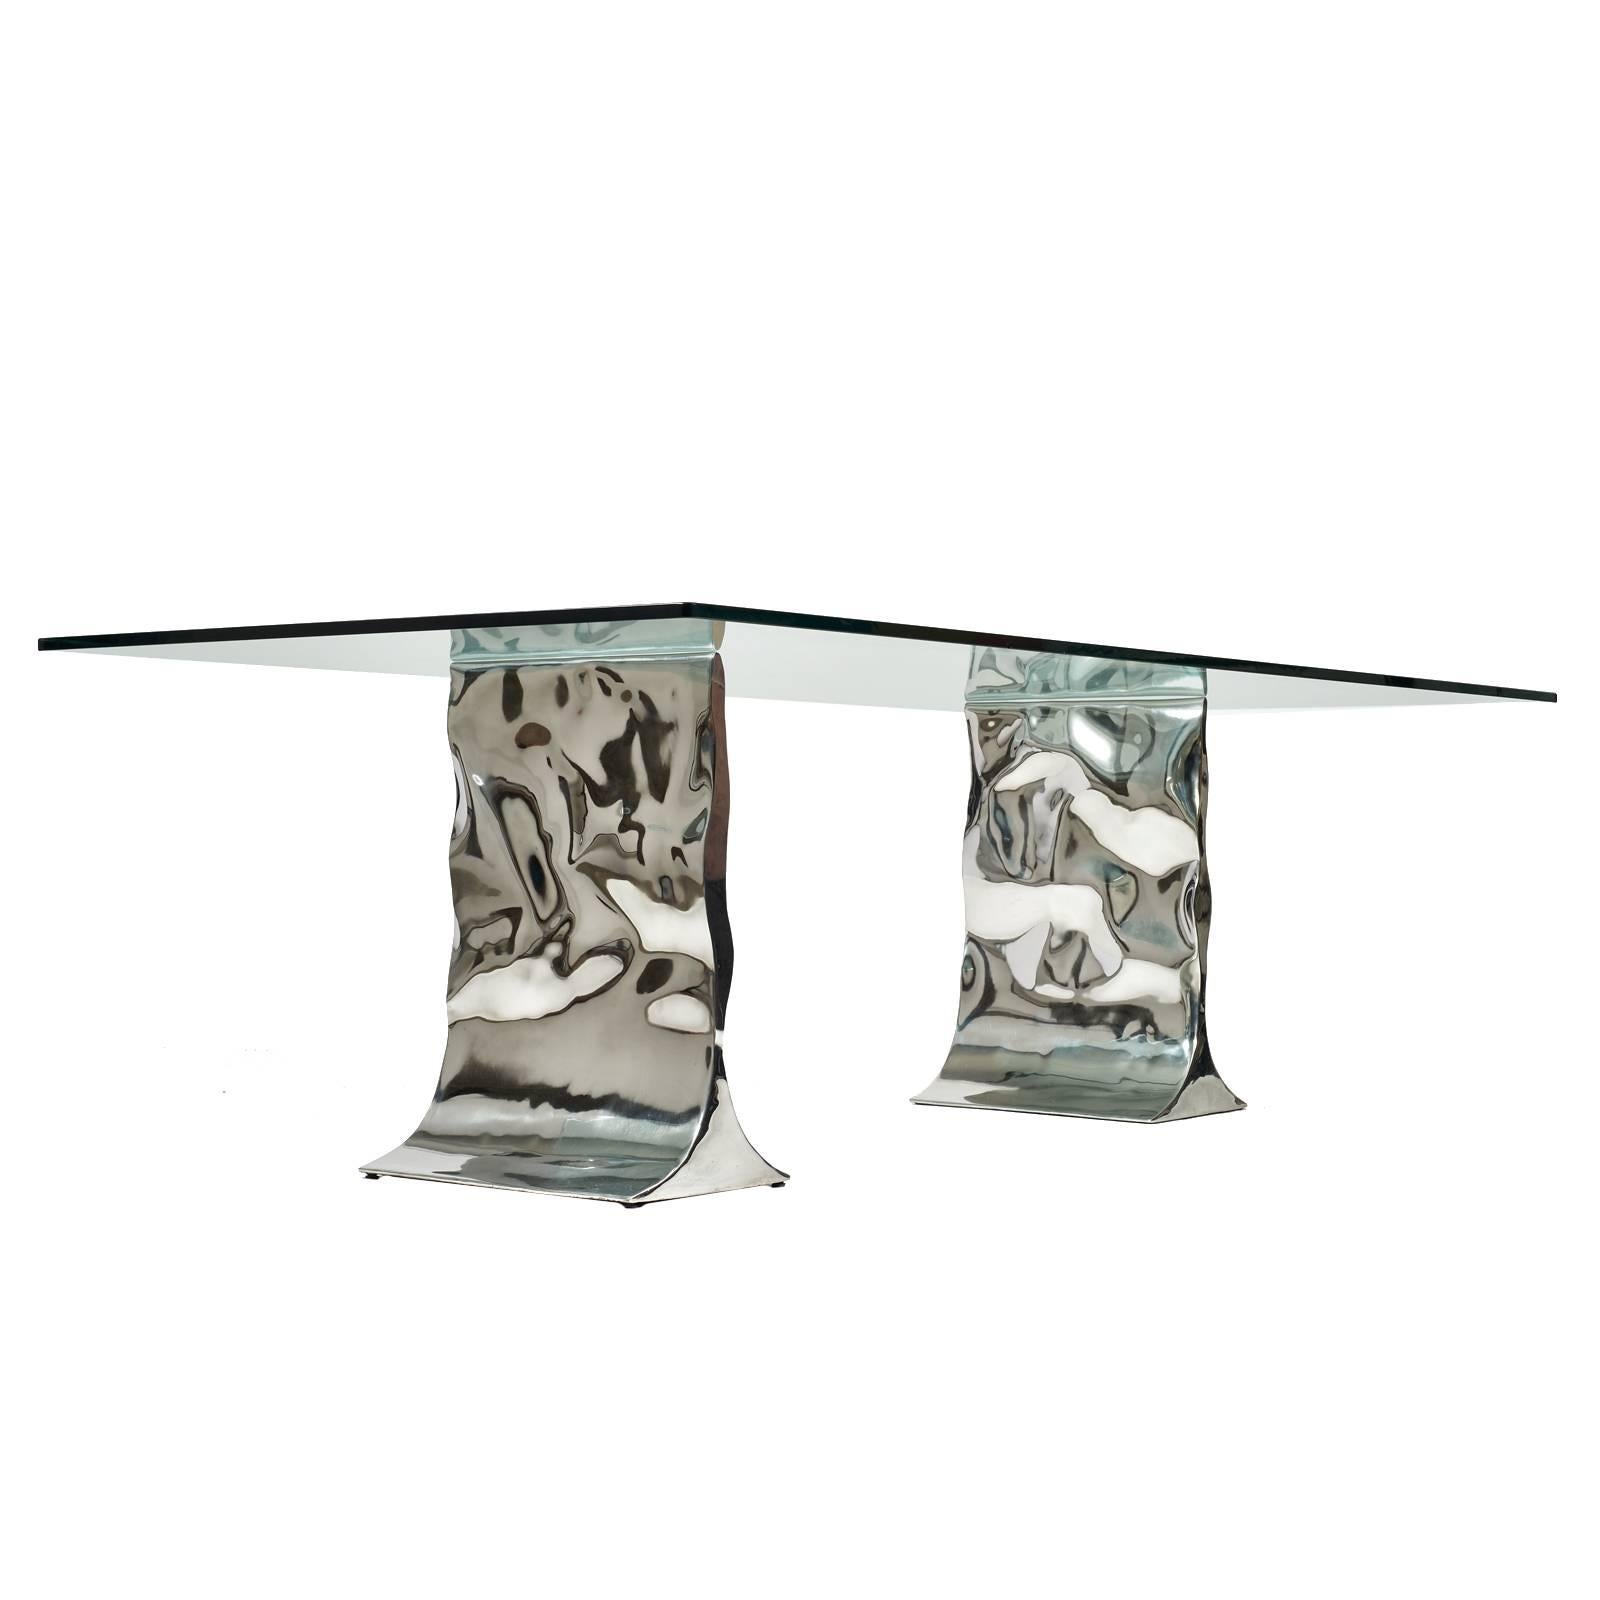 Stunning Polished Metal Silas Seandel Dining Table Signed, circa 1983